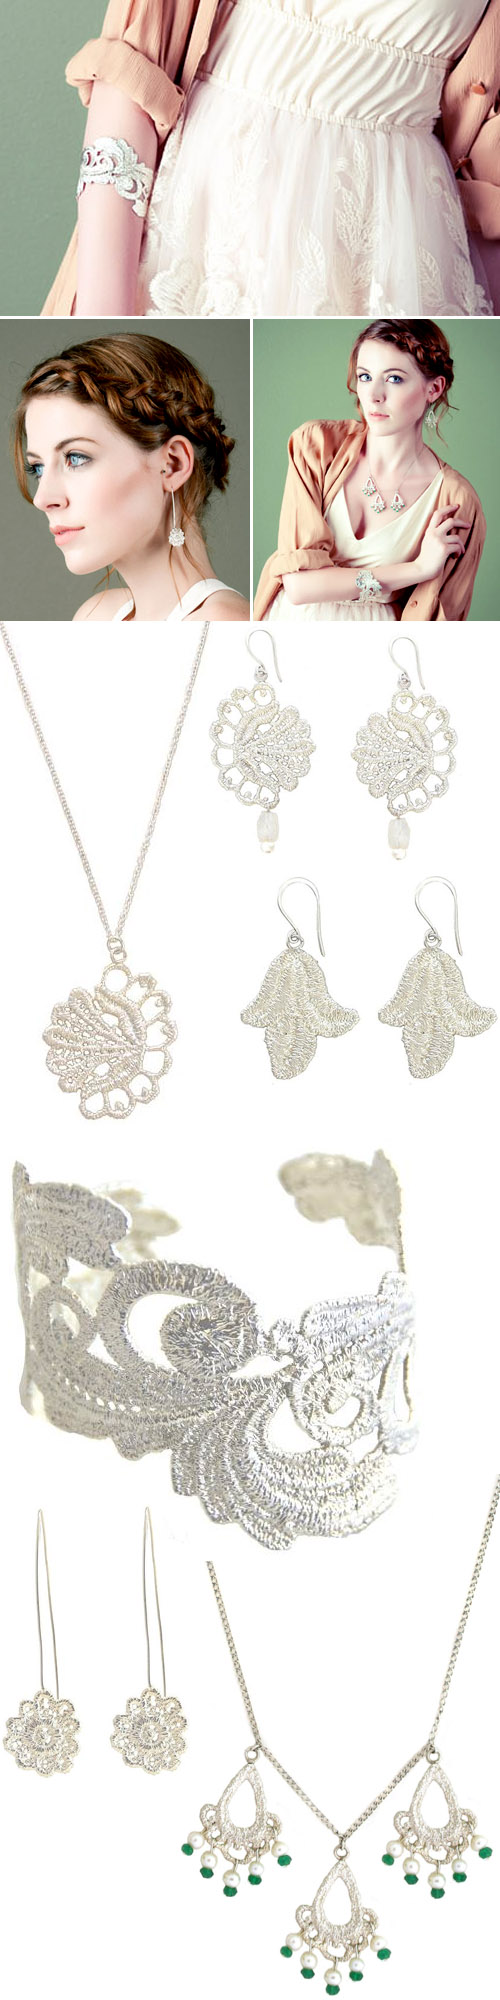 silver cast lace bridal jewelry By Jeannie